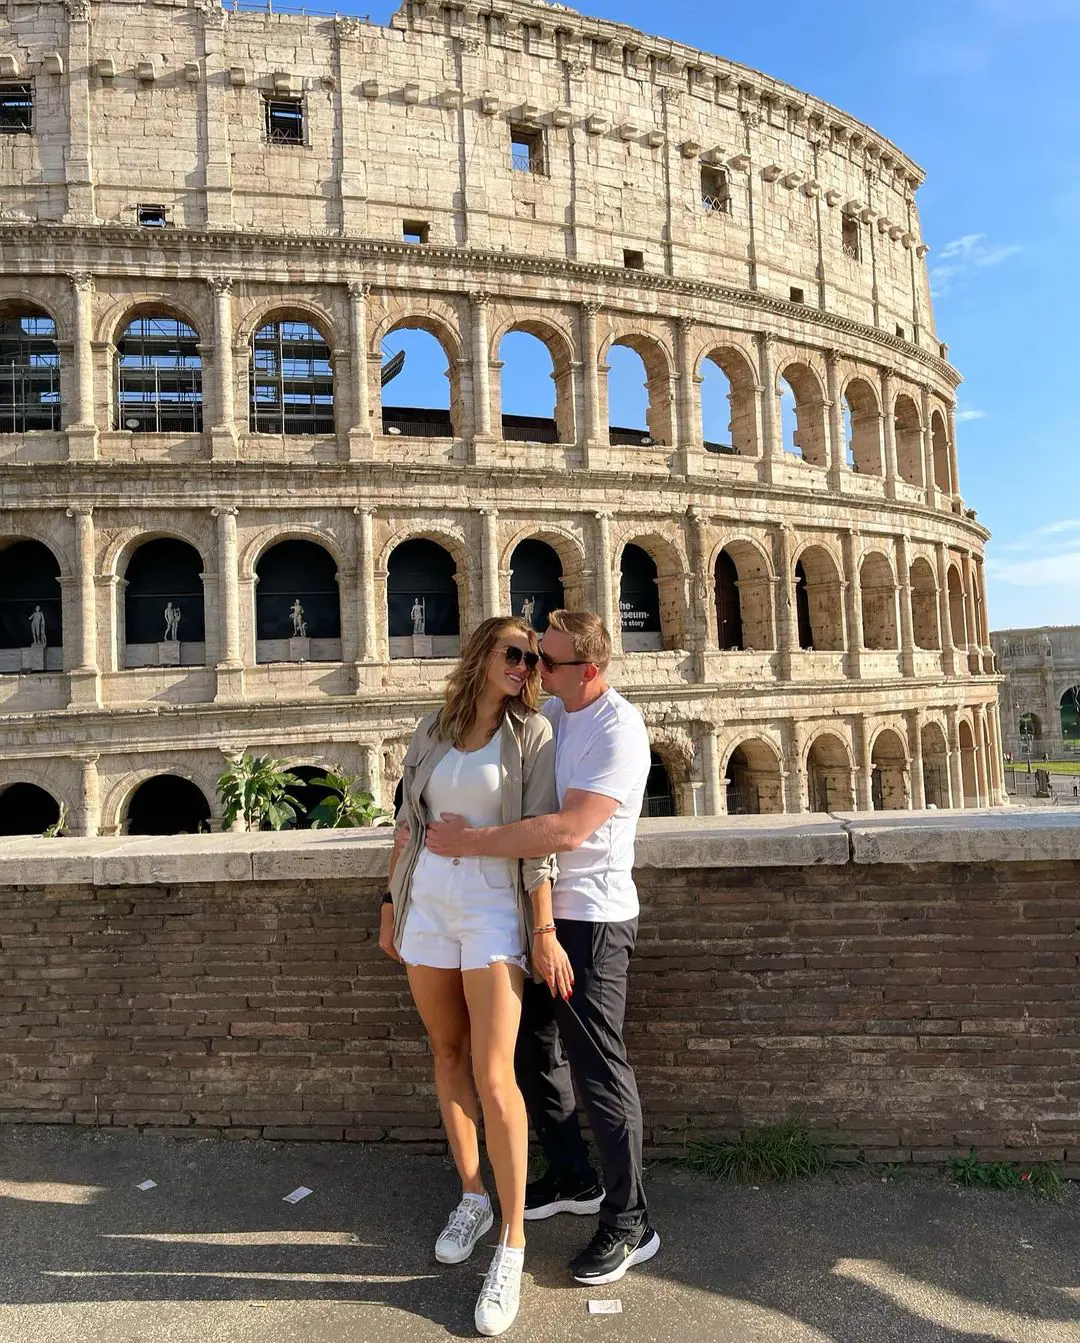 Aryna and Konstantin posing in front of The Colosseum in Rome, Italy in May 2022 